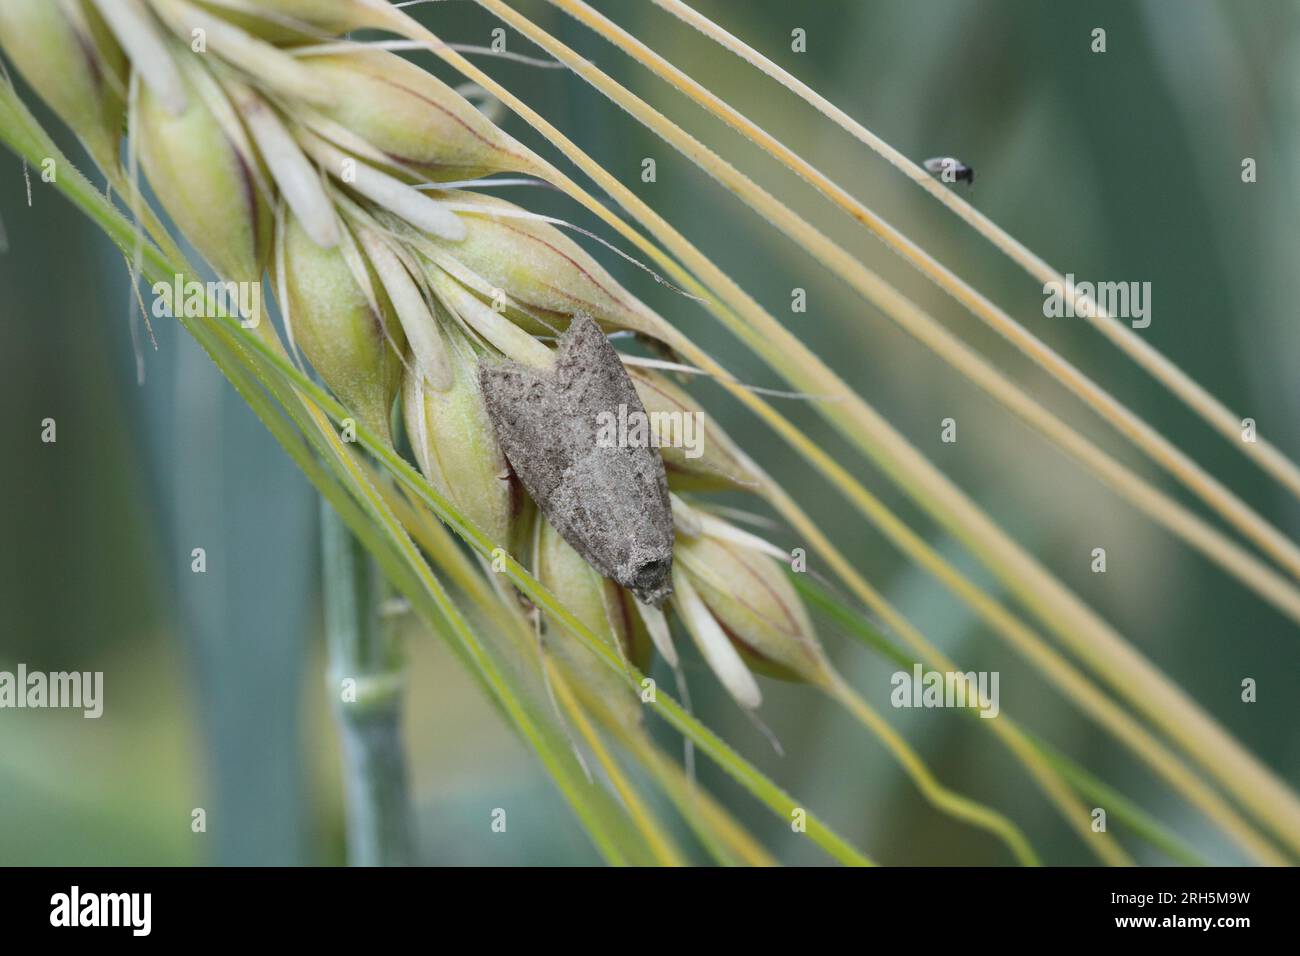 Cnephasia pasiuana pumicana moth in the family Tortricidae. Sitting on an ear of barley. Stock Photo